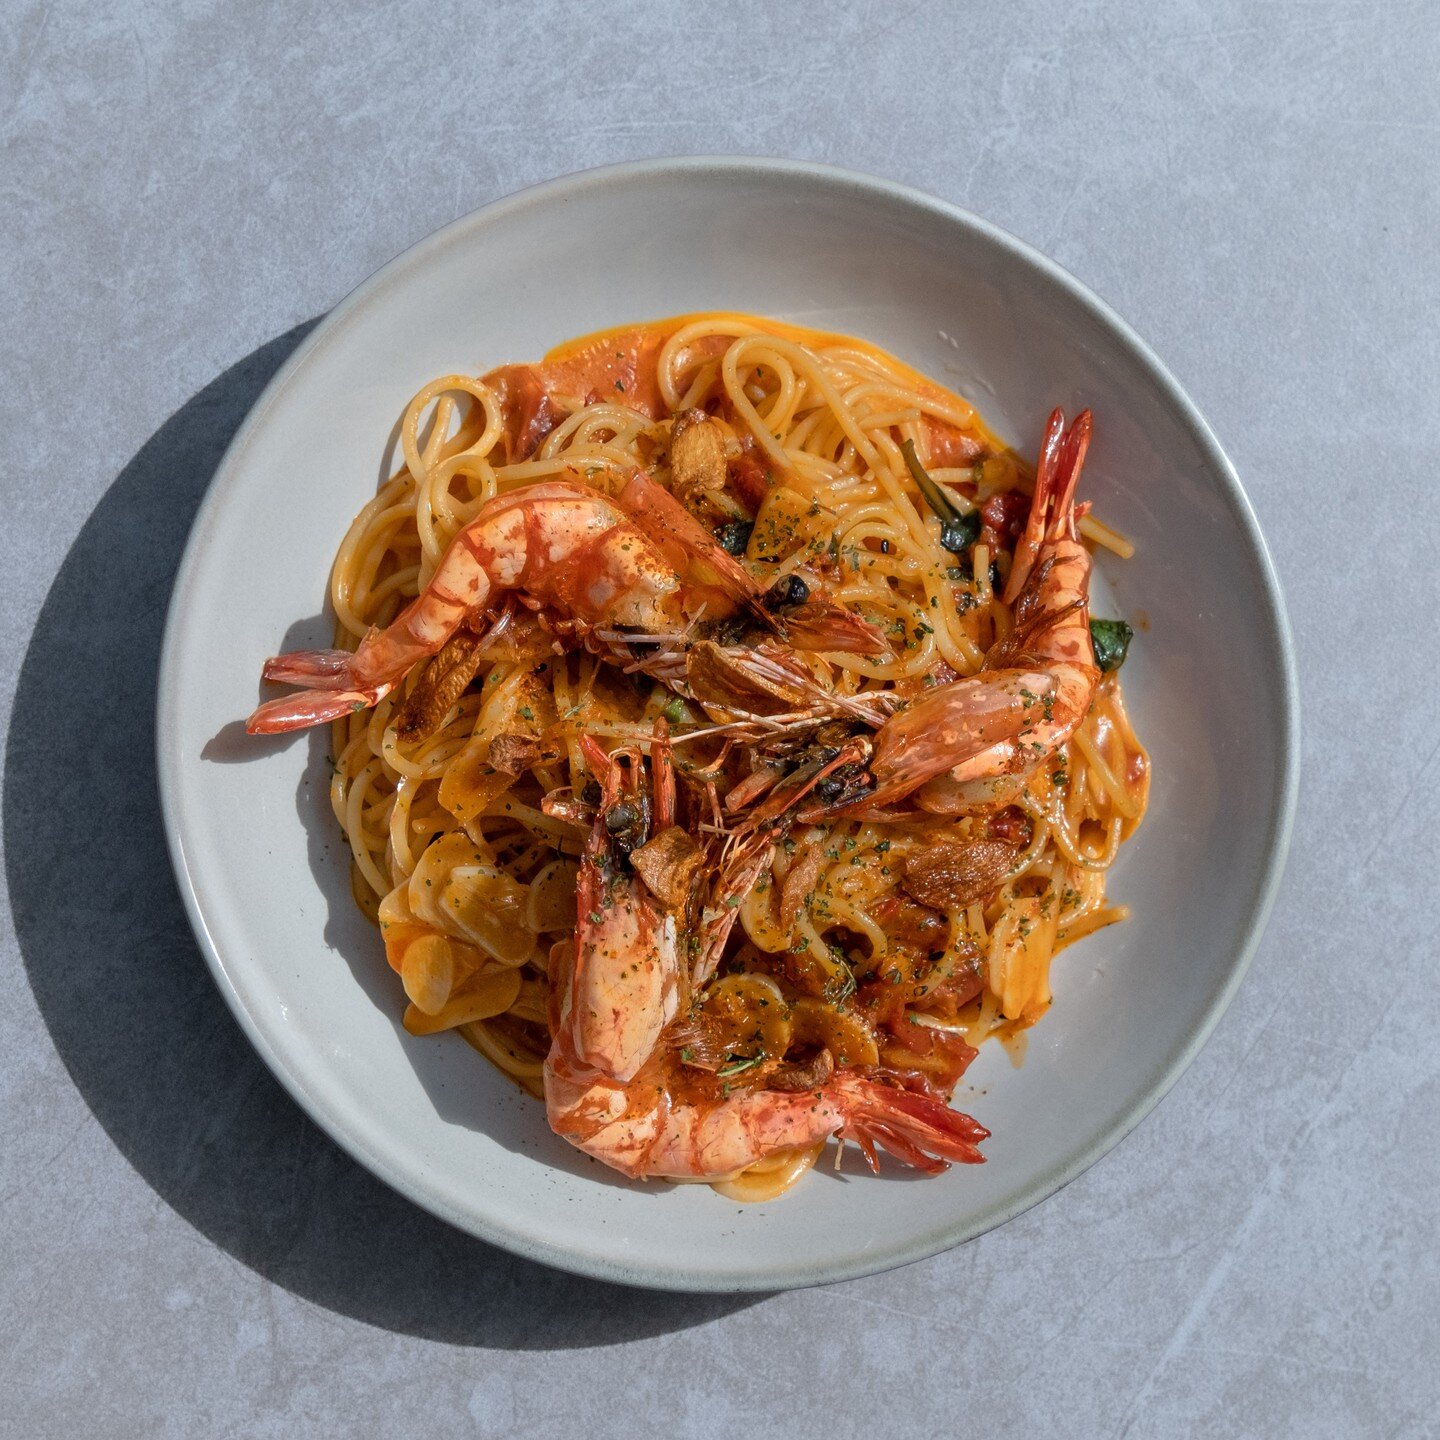 Our all-time favourite, Spaghettini Lobster Bisque With Grilled Prawn, only available in set.
我們的私心推介，龍蝦濃汁意粉伴烤大蝦，套餐限定！

#Spaghettini #LobsterBisque
#IntervalHK #AllDayDining #HKRestaurant
#Coffee #Food #Wine #Pizza #Pasta 
#SpecialtyCoffee #CoffeeCol